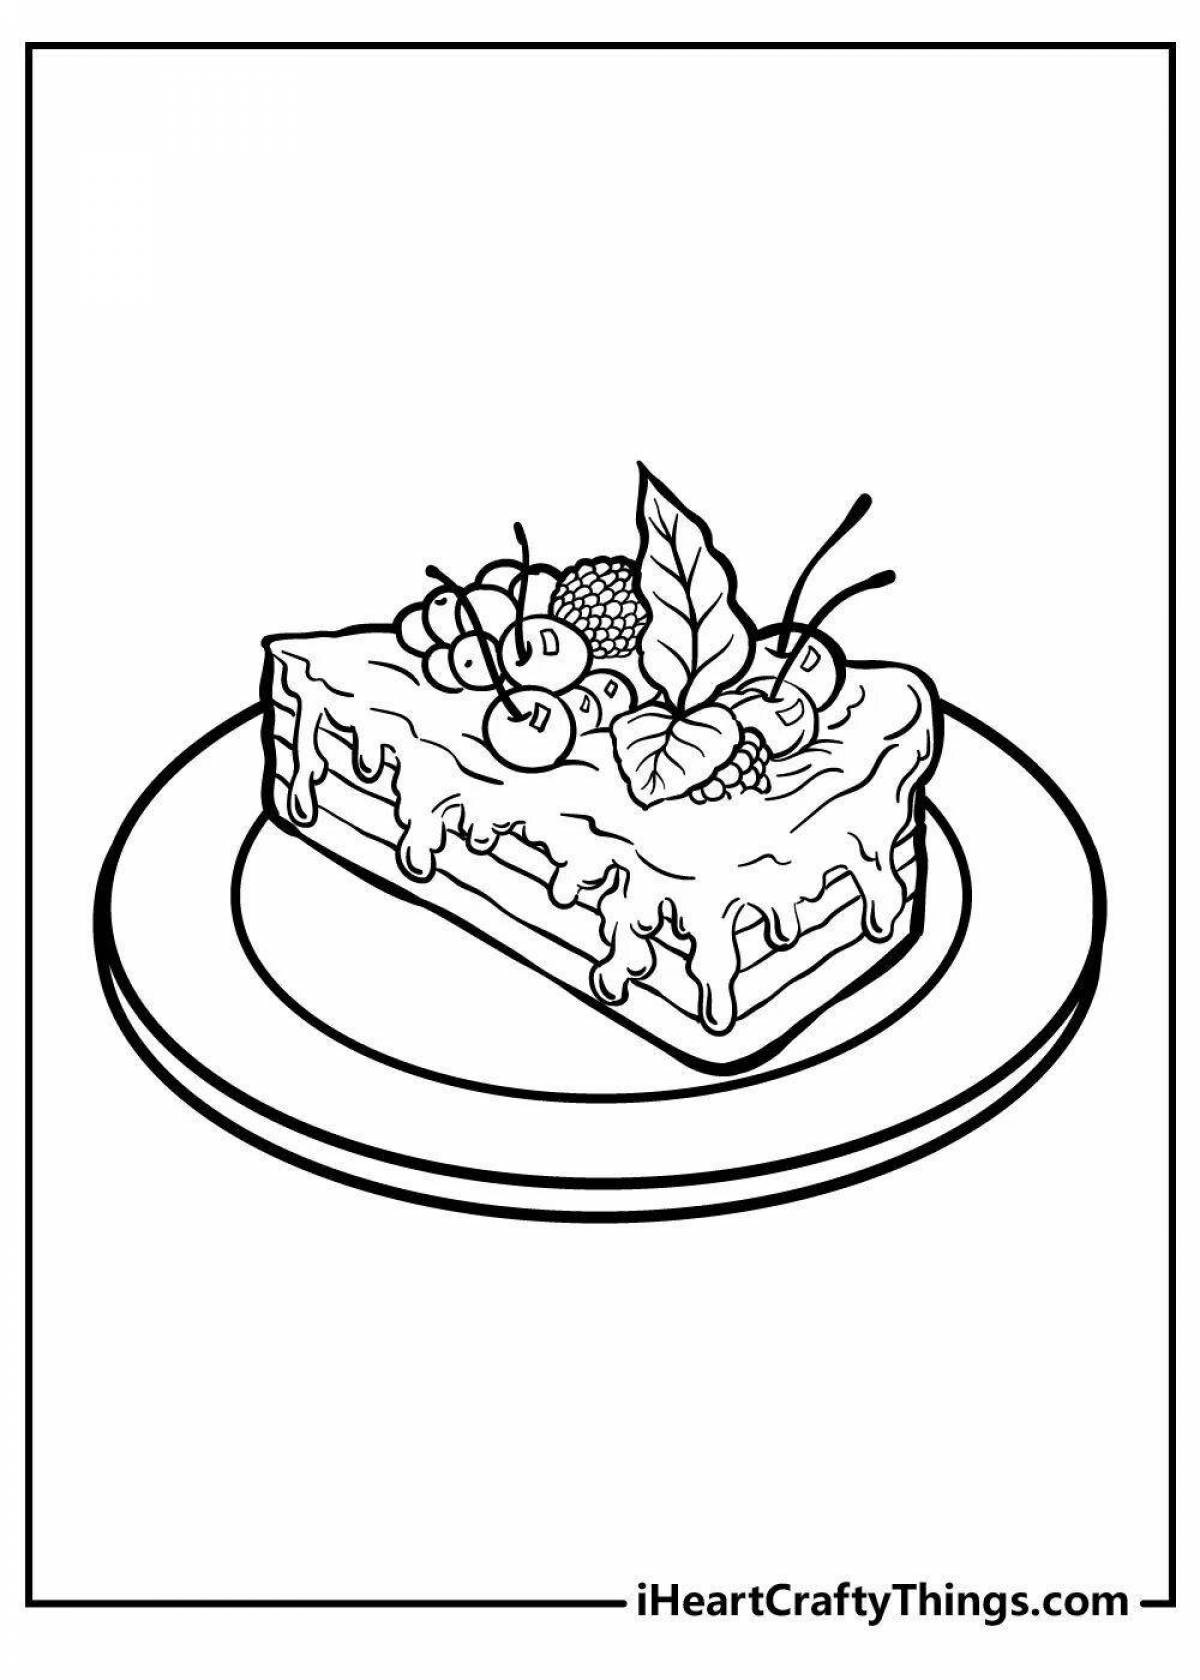 Delightful coloring cake for 3-4 year olds